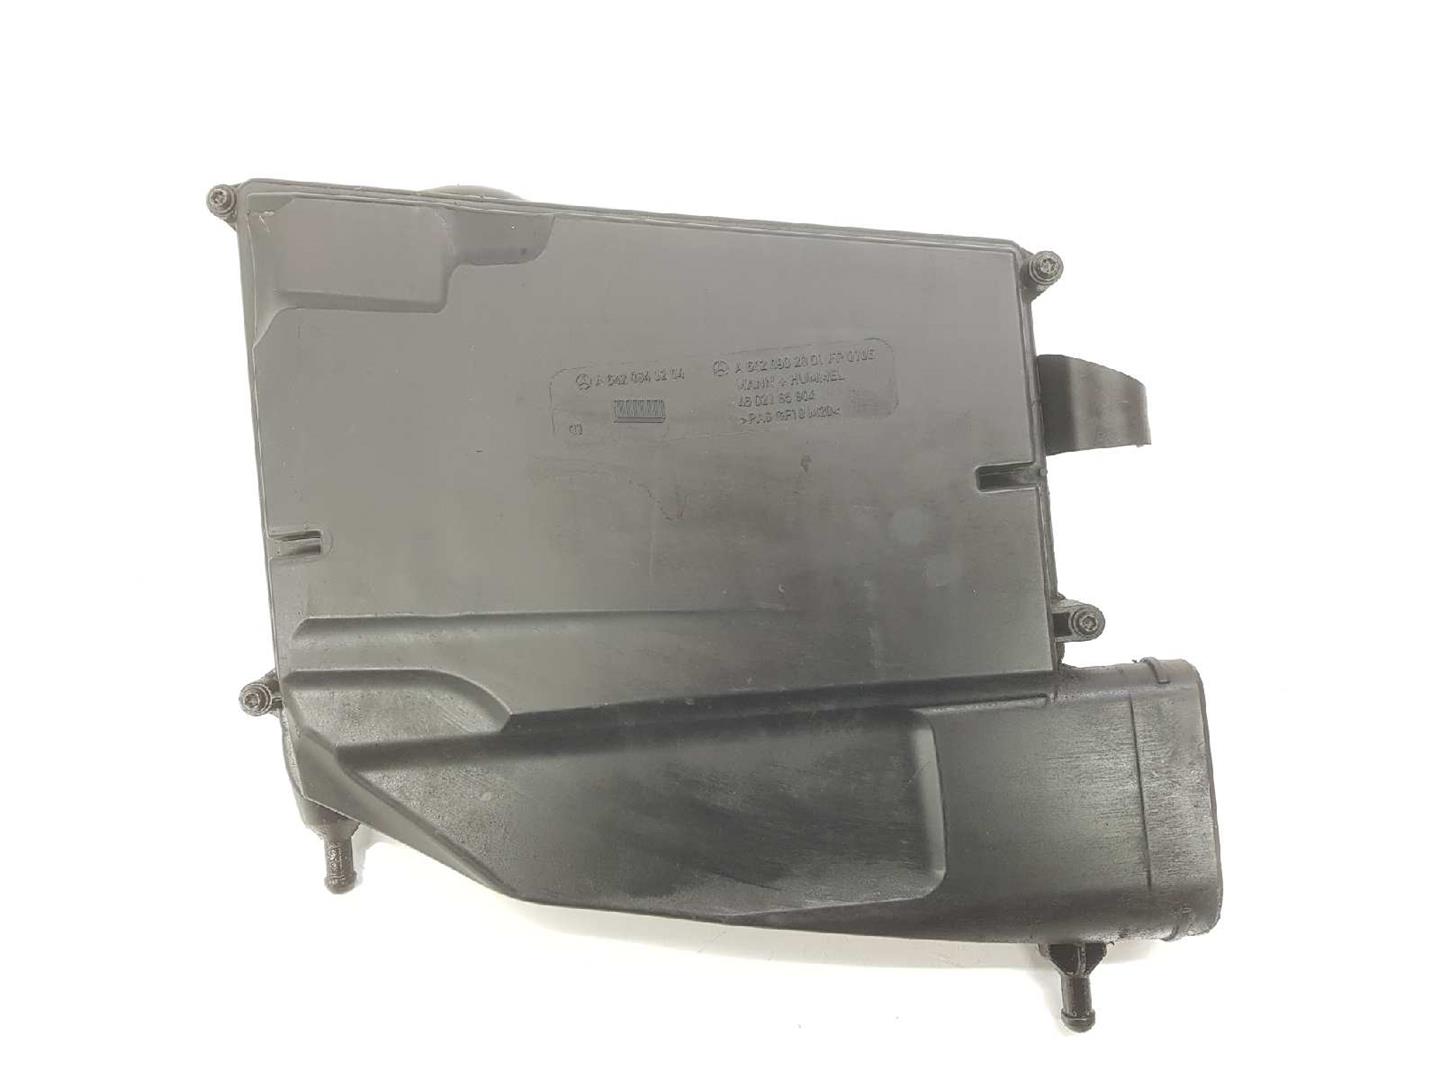 MERCEDES-BENZ M-Class W164 (2005-2011) Other Engine Compartment Parts A6420902001, A6420902001 19743323